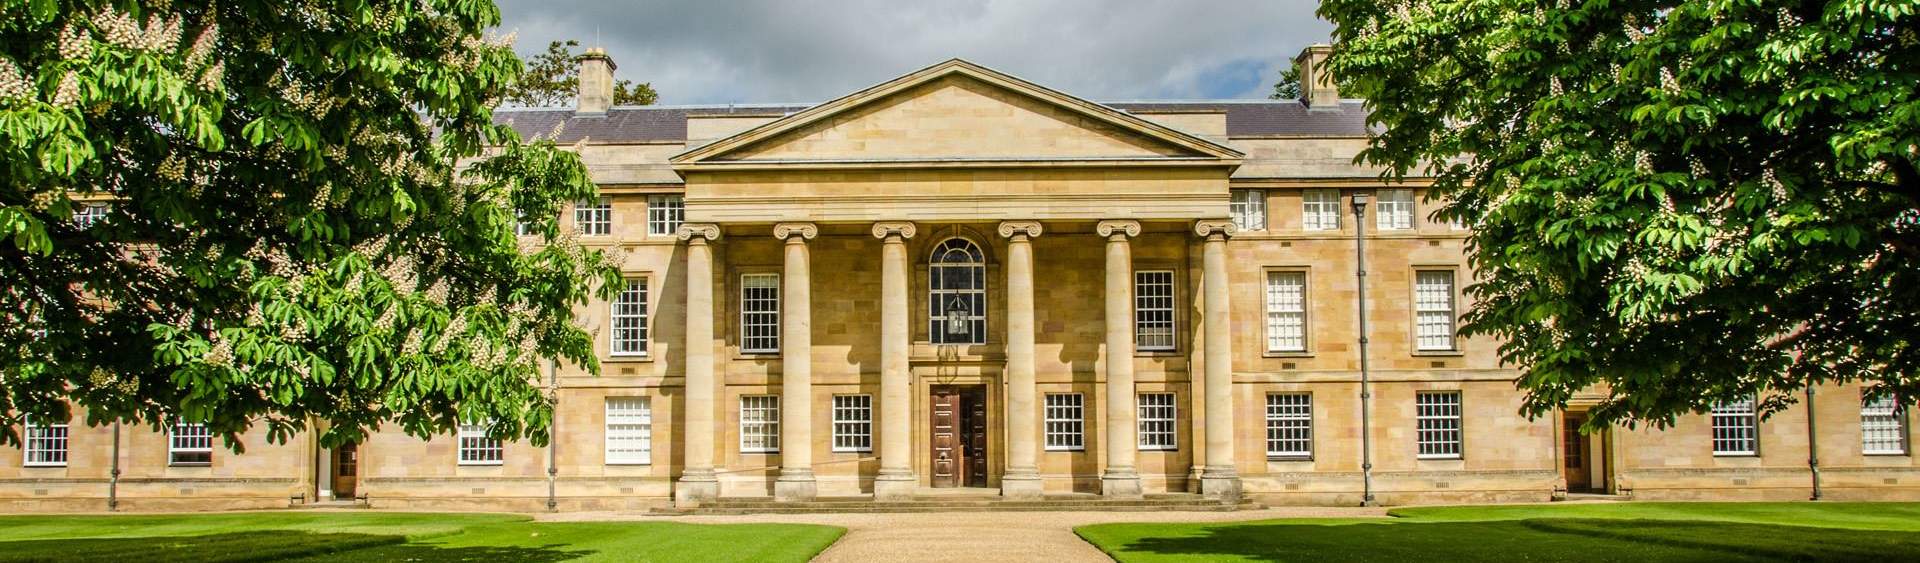 Downing College Central Building